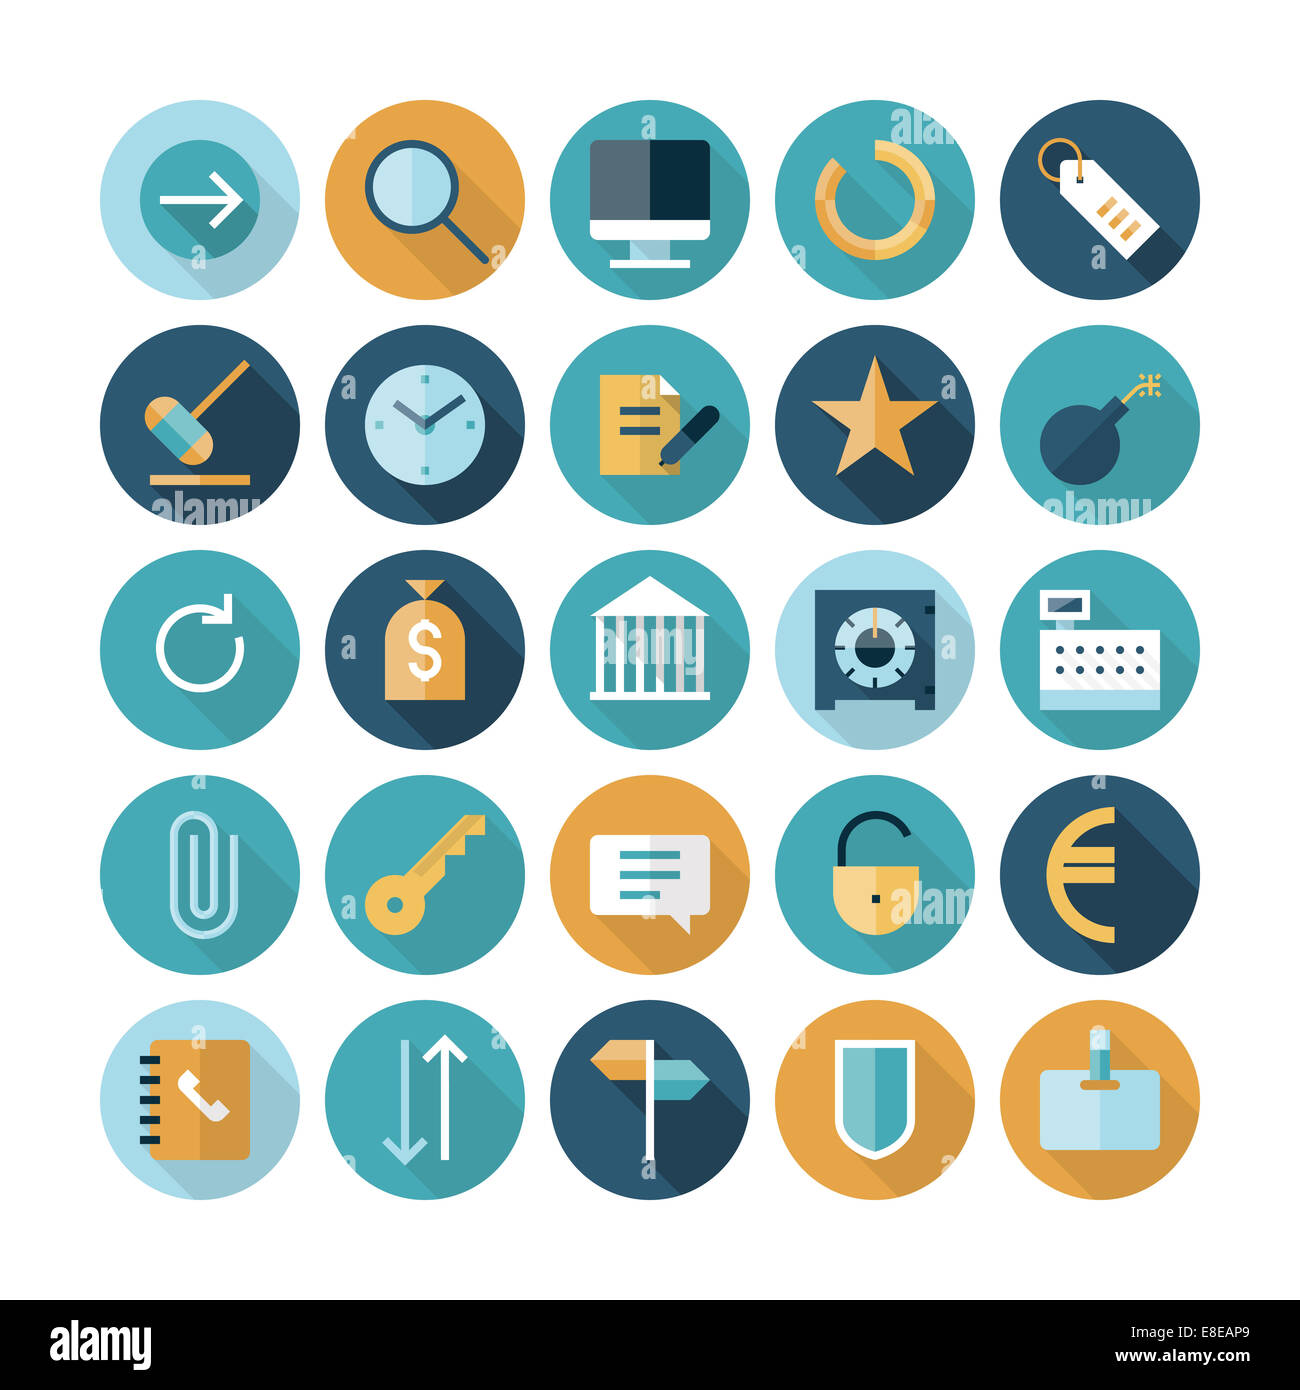 Flat design icons for business and finance. Stock Photo